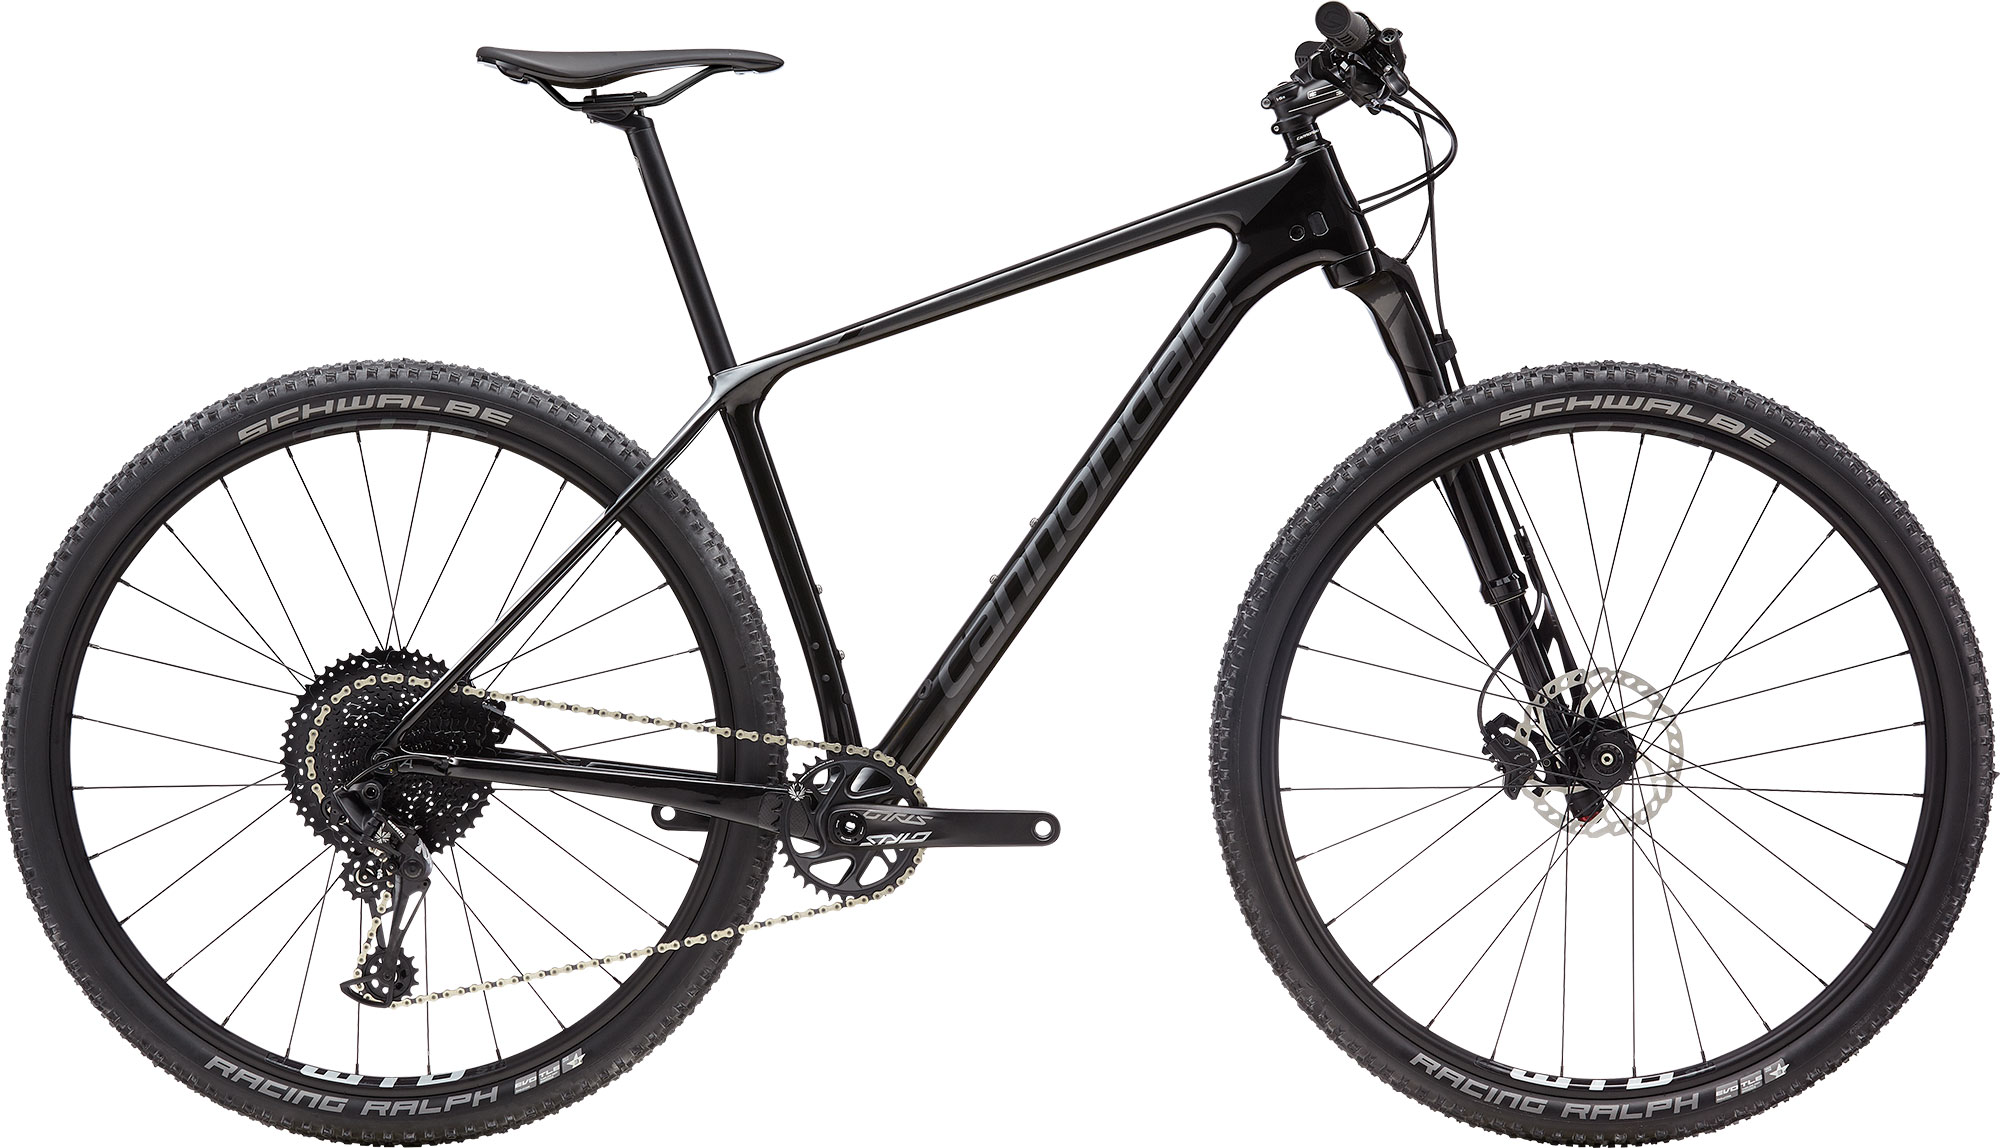 Велосипед 29" Cannondale F-SI Carbon 4 рама - L 2019 GRY серый фото 1